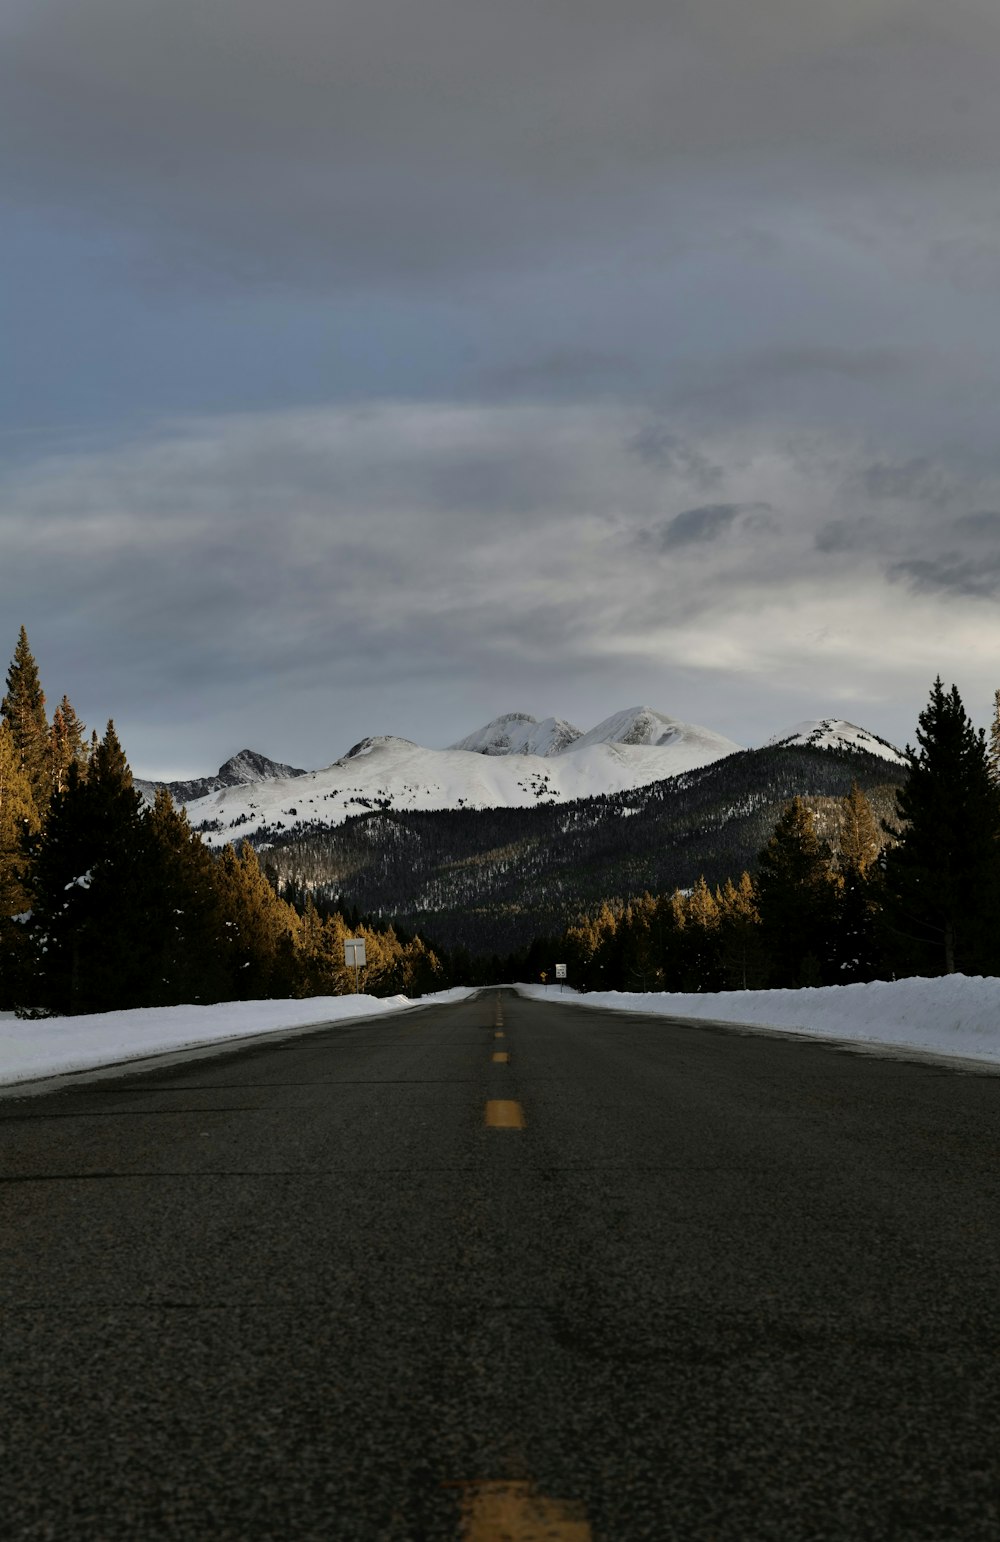 a road with snow on the ground and mountains in the background